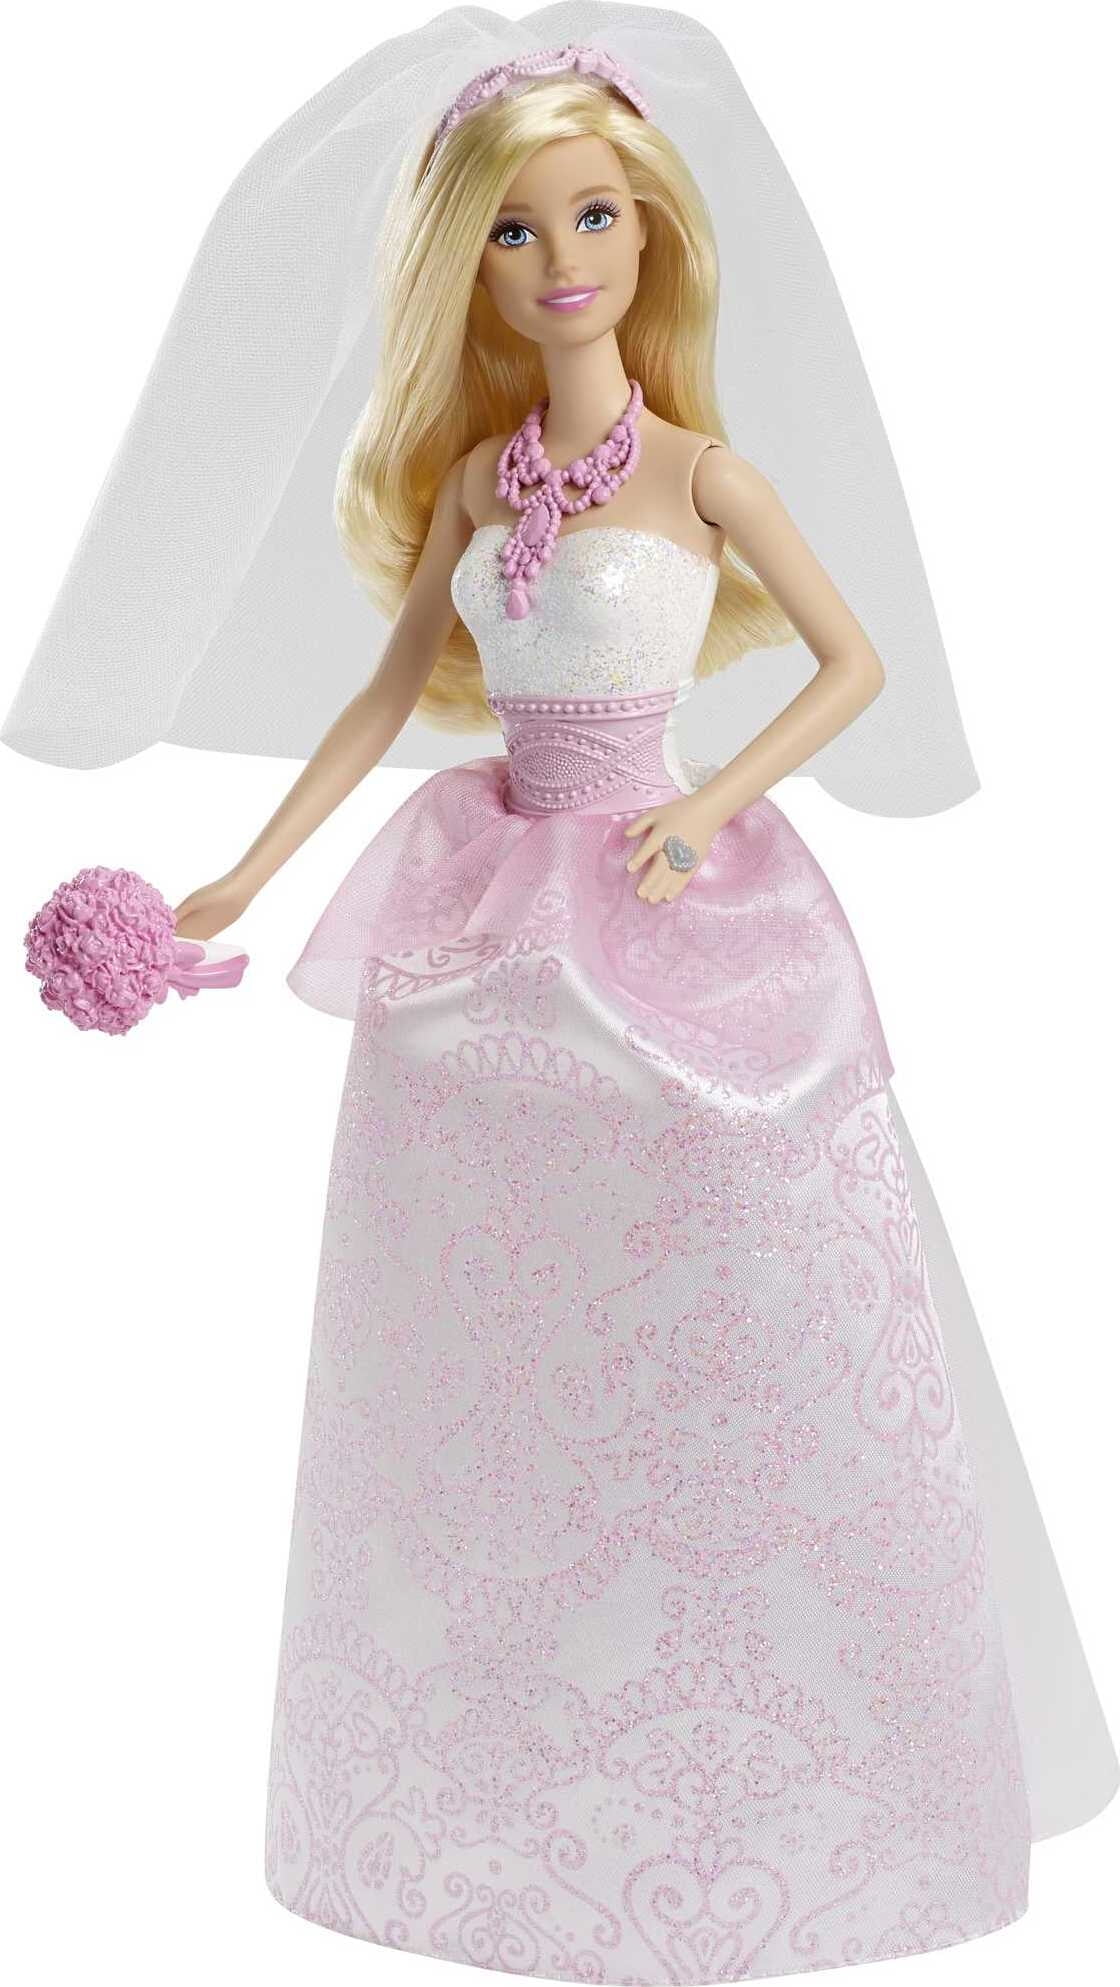 Barbie Bride Doll in Fairytale Wedding Dress with Veil, Bouquet and  Accessories